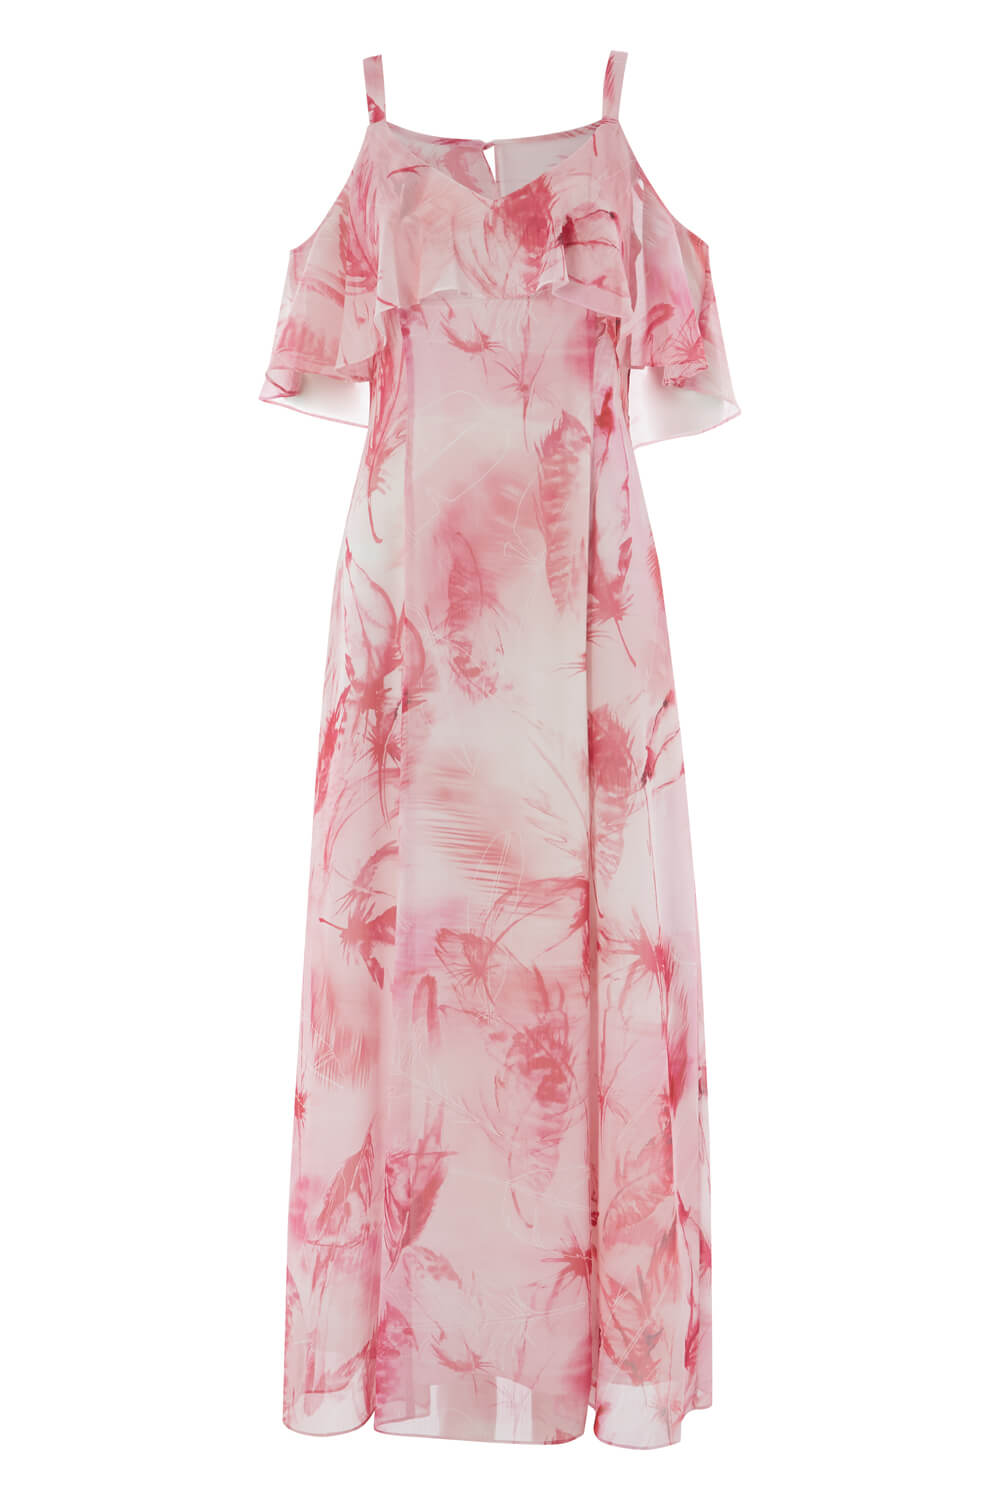 PINK Feather Print Cold Shoulder Maxi Dress, Image 4 of 4